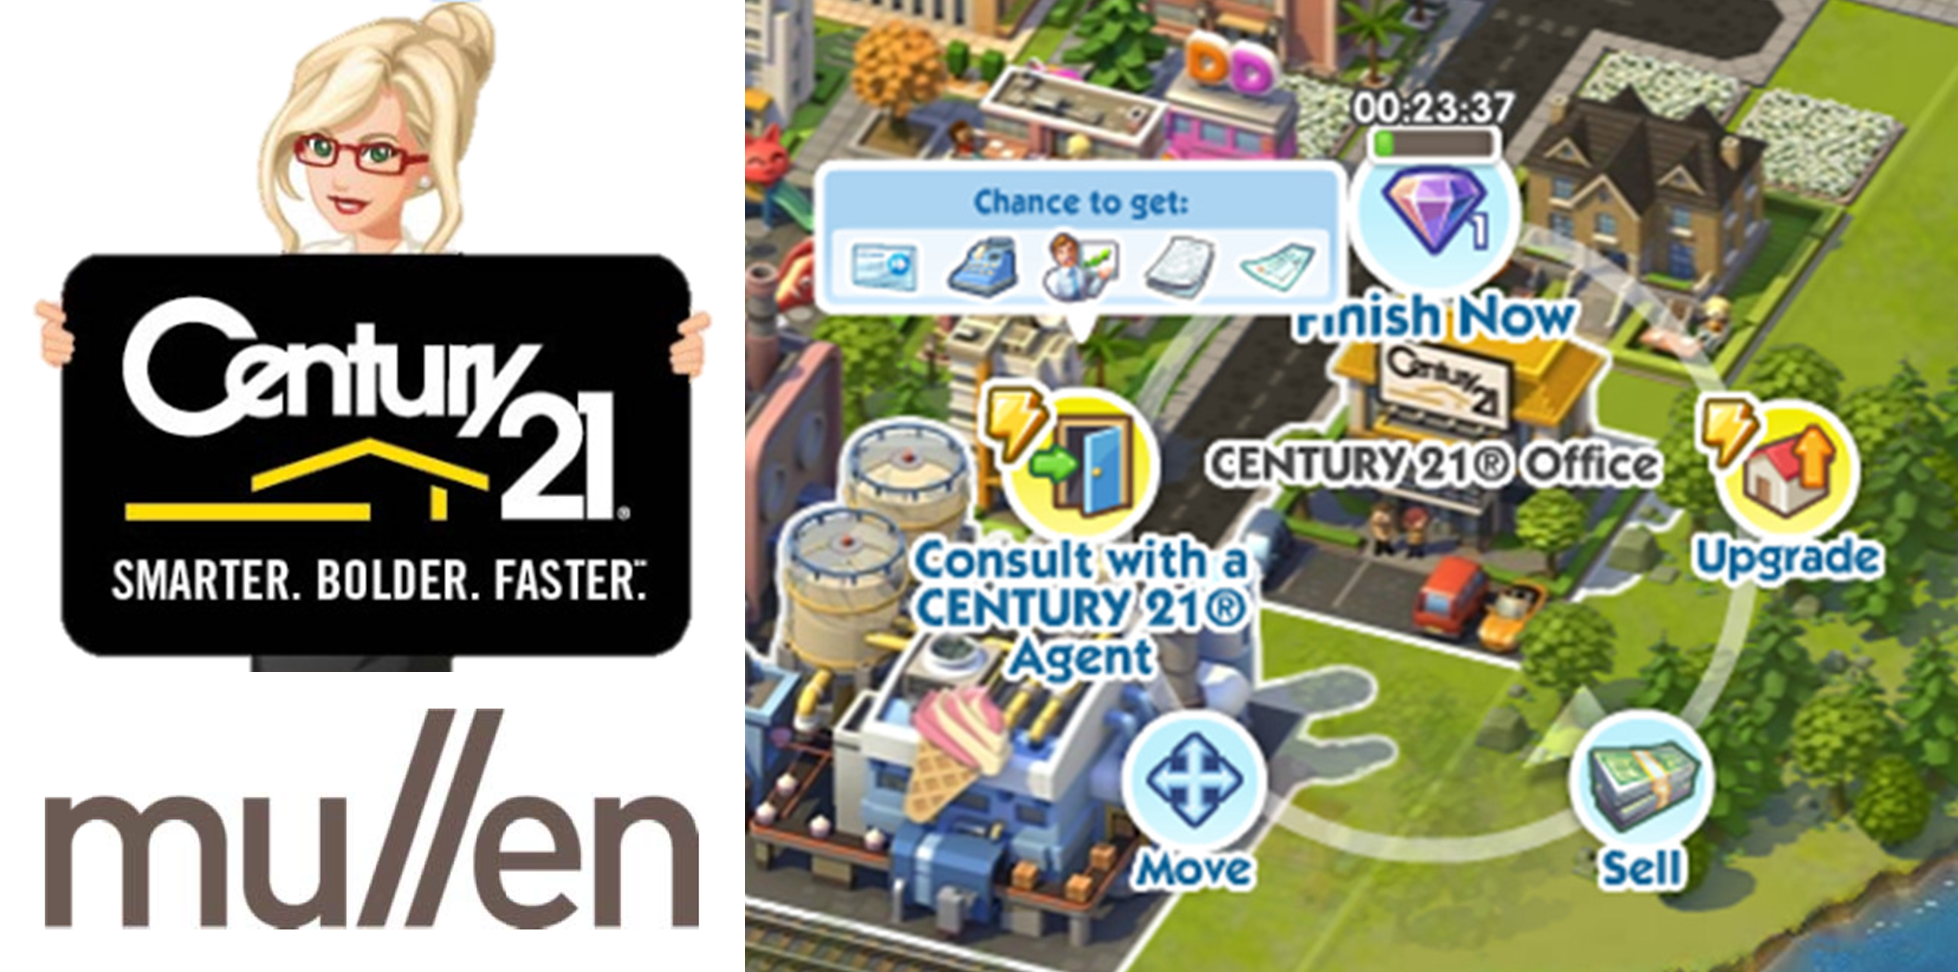 Century 21 Real Estate Moves into SimCity Social - Logo - https://s41078.pcdn.co/wp-content/uploads/2018/11/Centry21-1.png